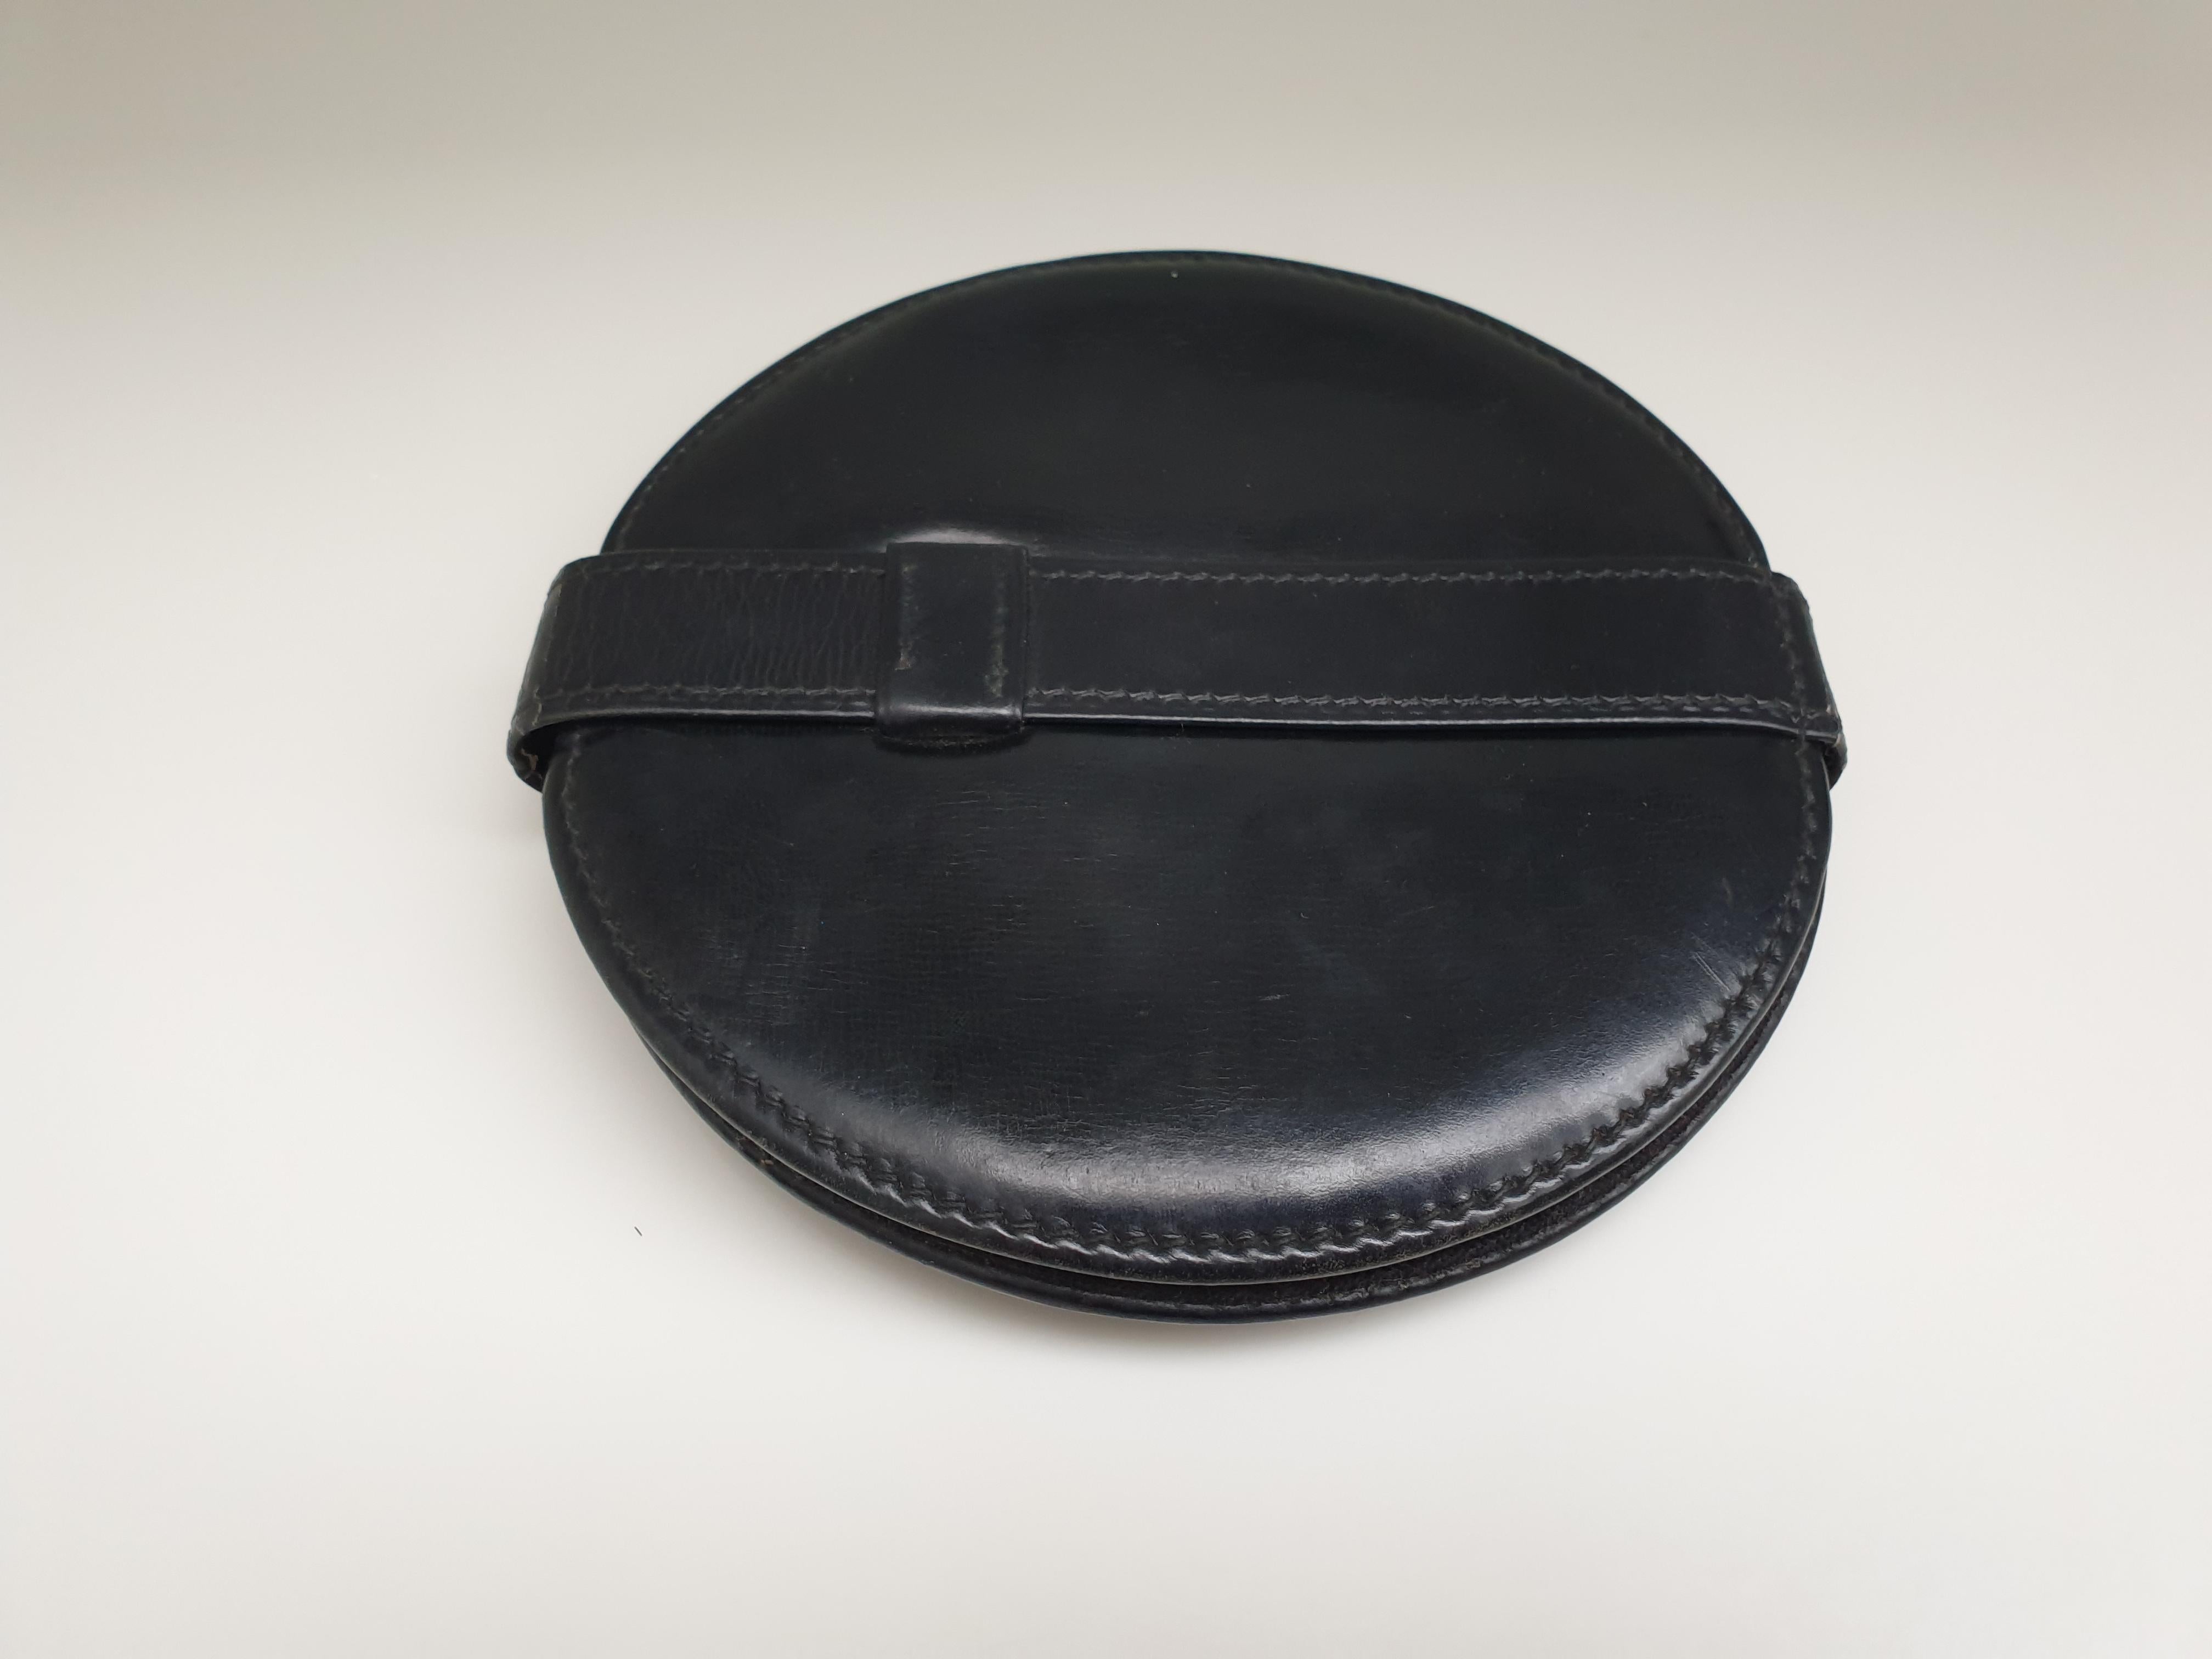 Useful travel mirror in black stitched leather, attributed to Jacques Adnet.  This folding, leather framed mirror has one distressed mirror and on replaced mirror so it is eminently usable. The exterior frame is black stitched leather and the